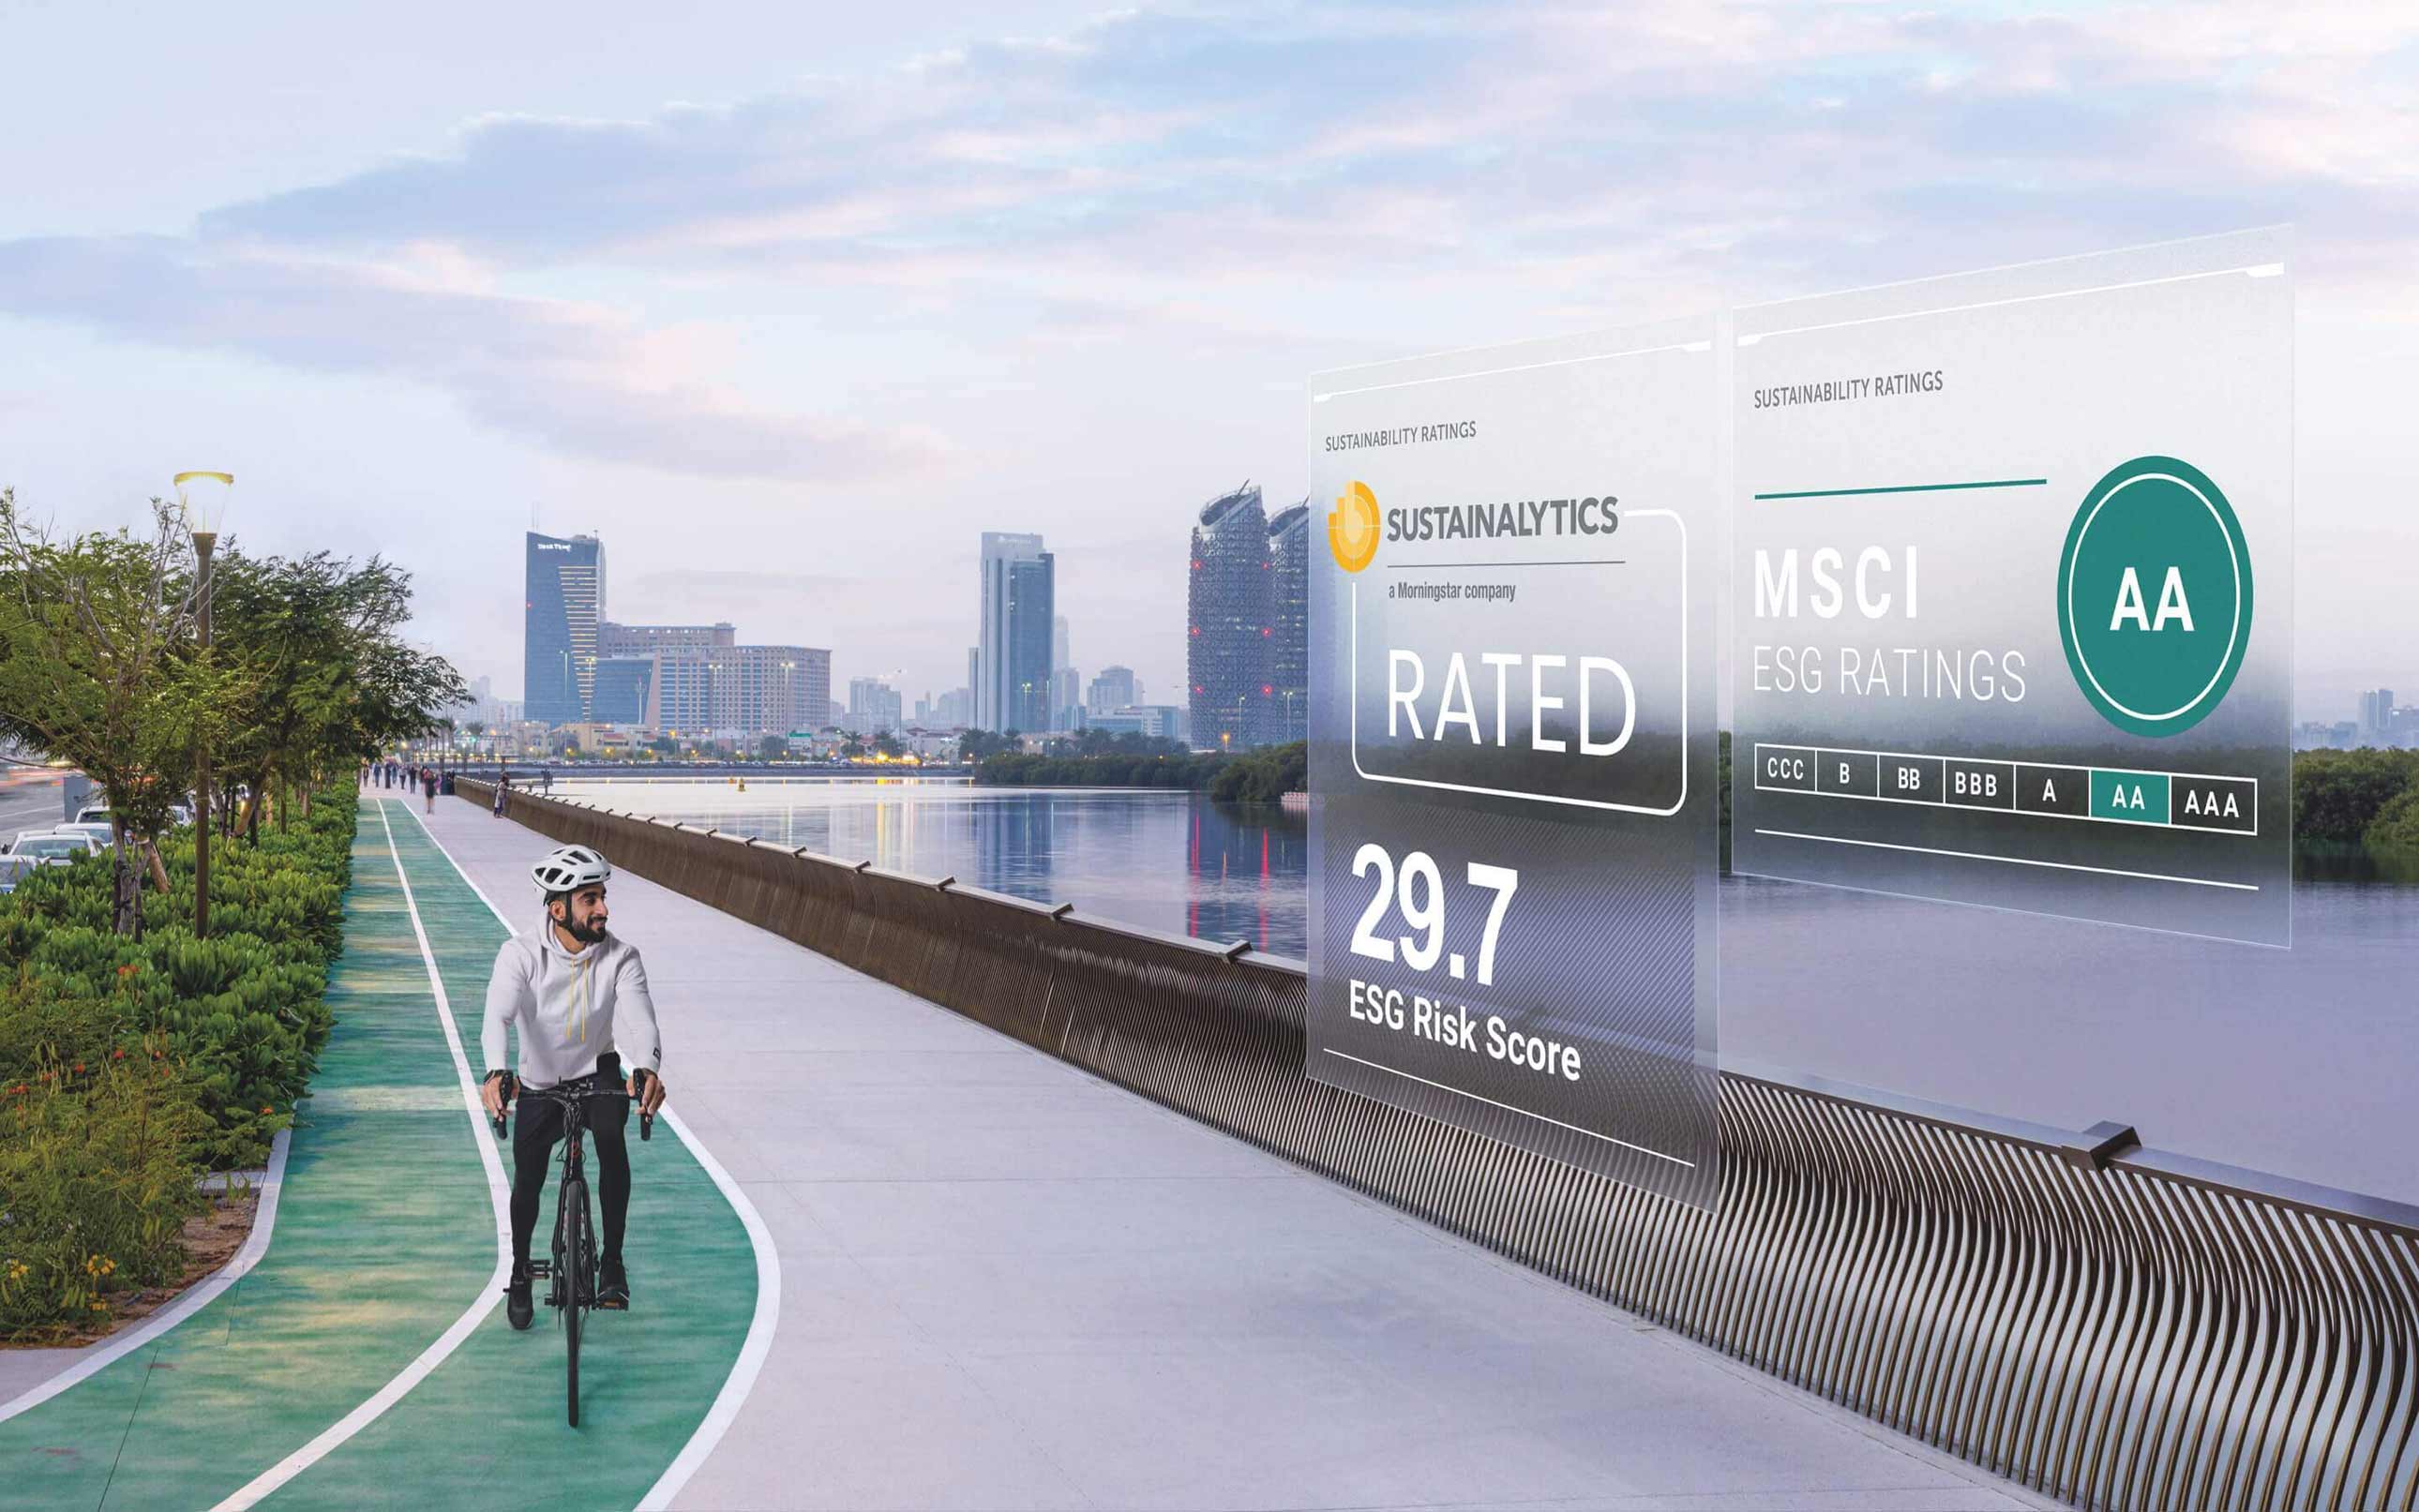 A man rides a bike along the water, as a graphic of Sustainability Ratings displays above.